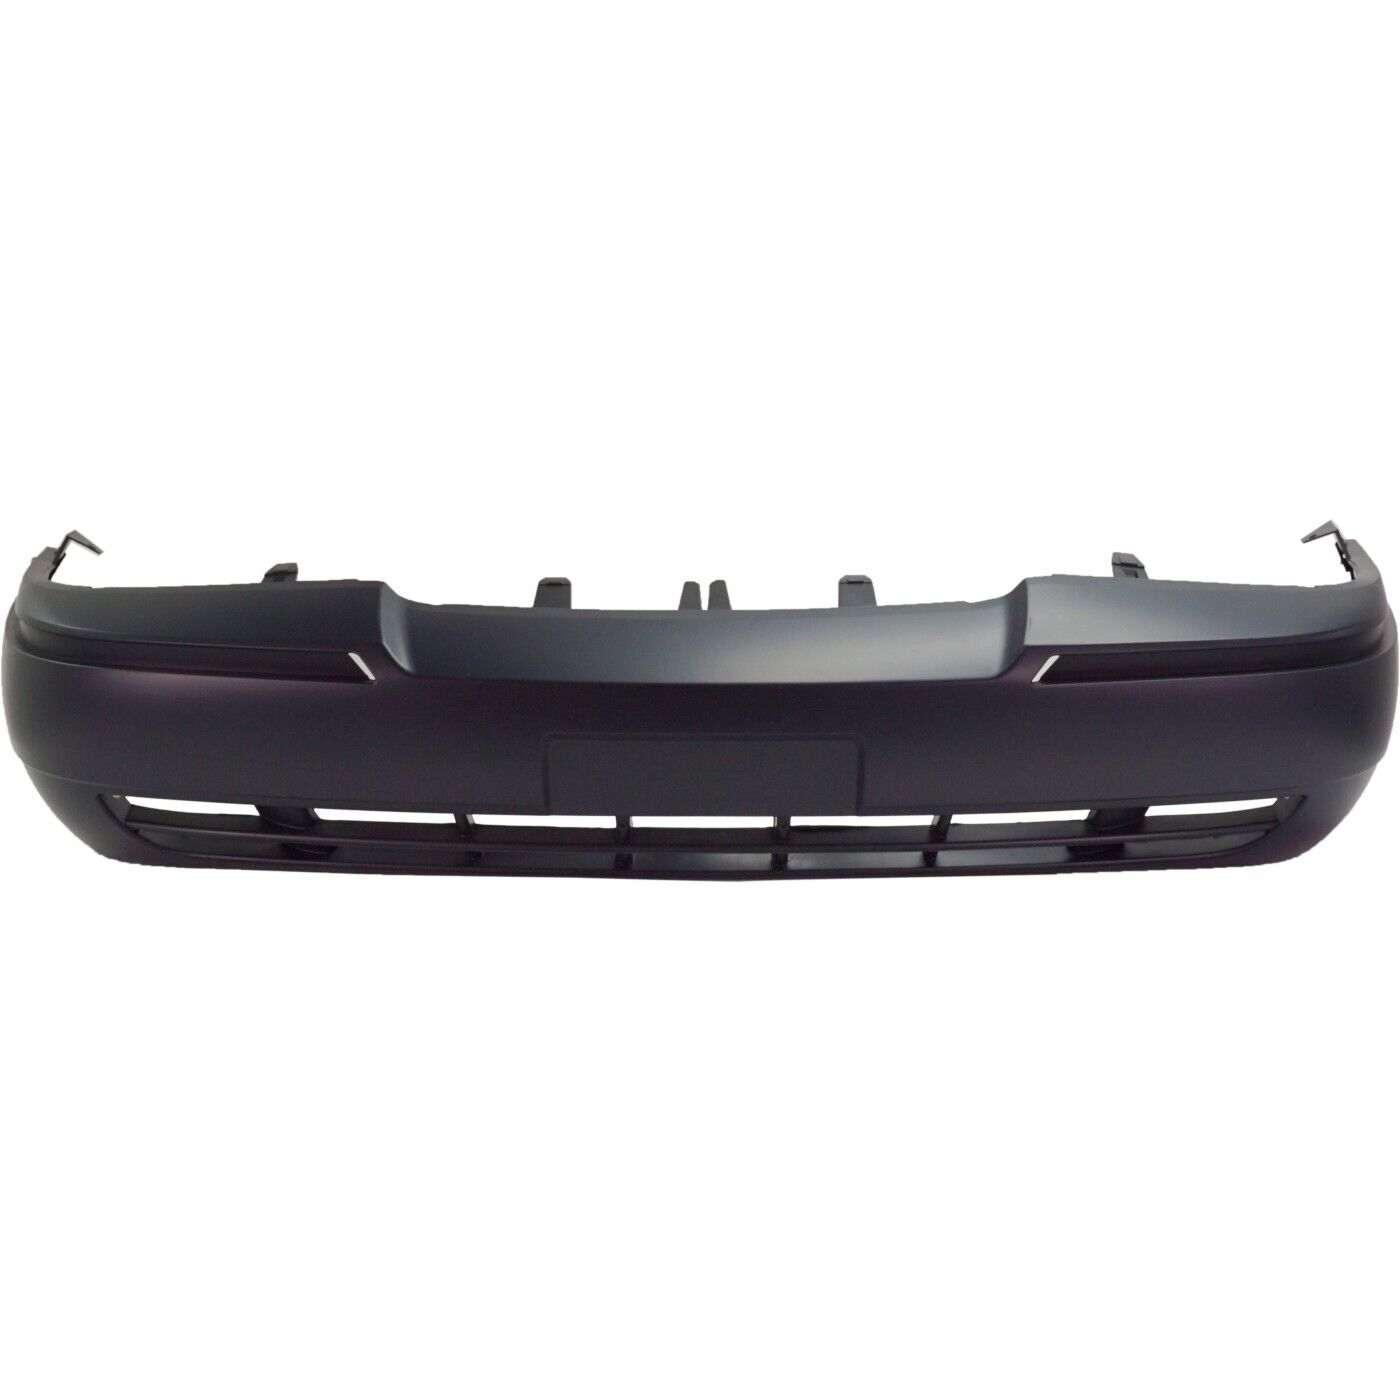 Front Bumper Cover For 2003-2005 Mercury Grand Marquis Primed